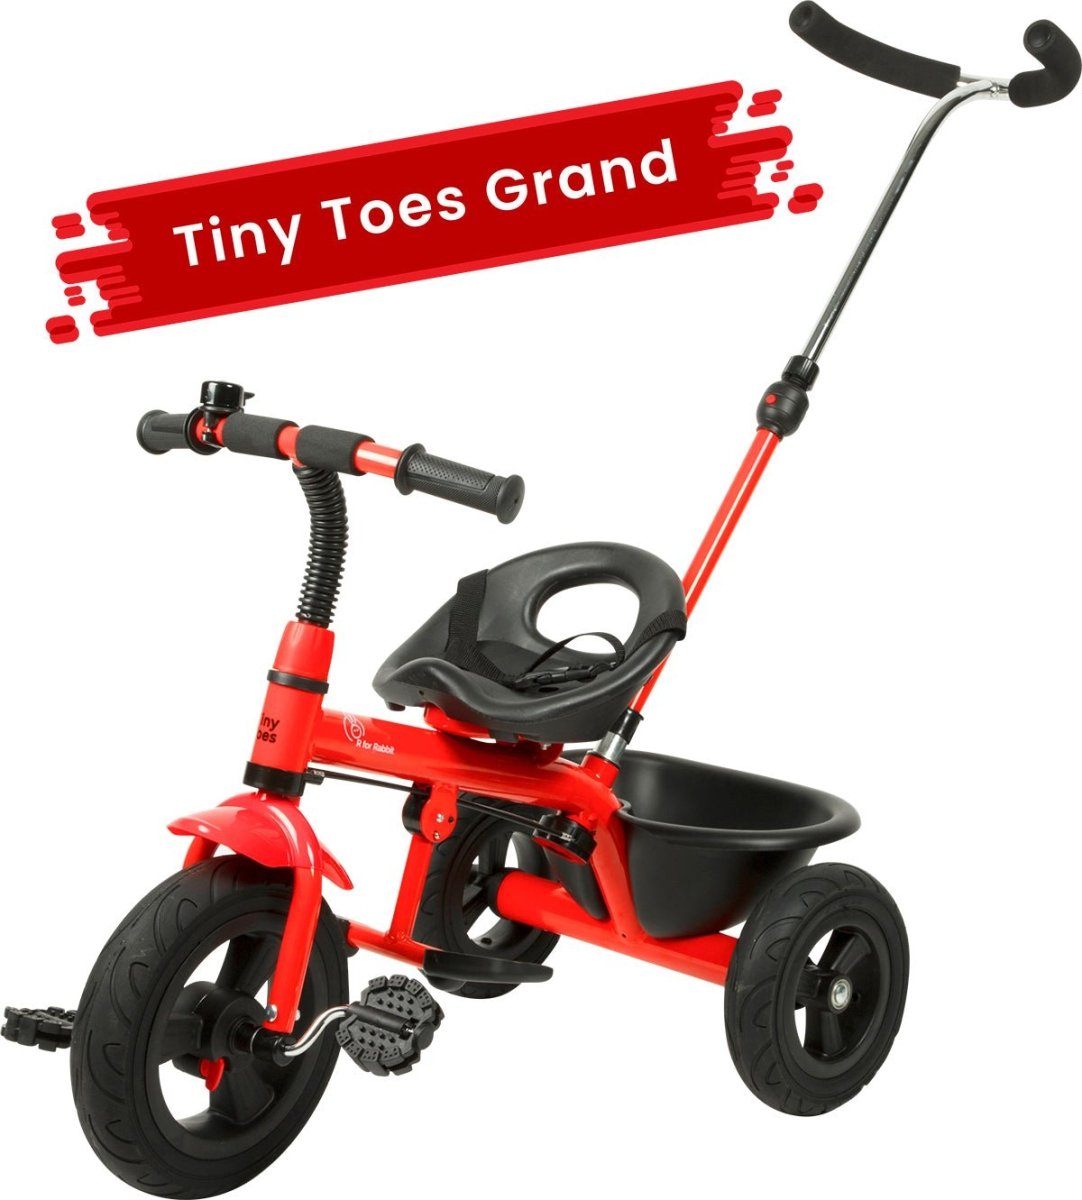 R for Rabbit Tiny Toes Grand Baby Tricycles- Red - TCTTHR01